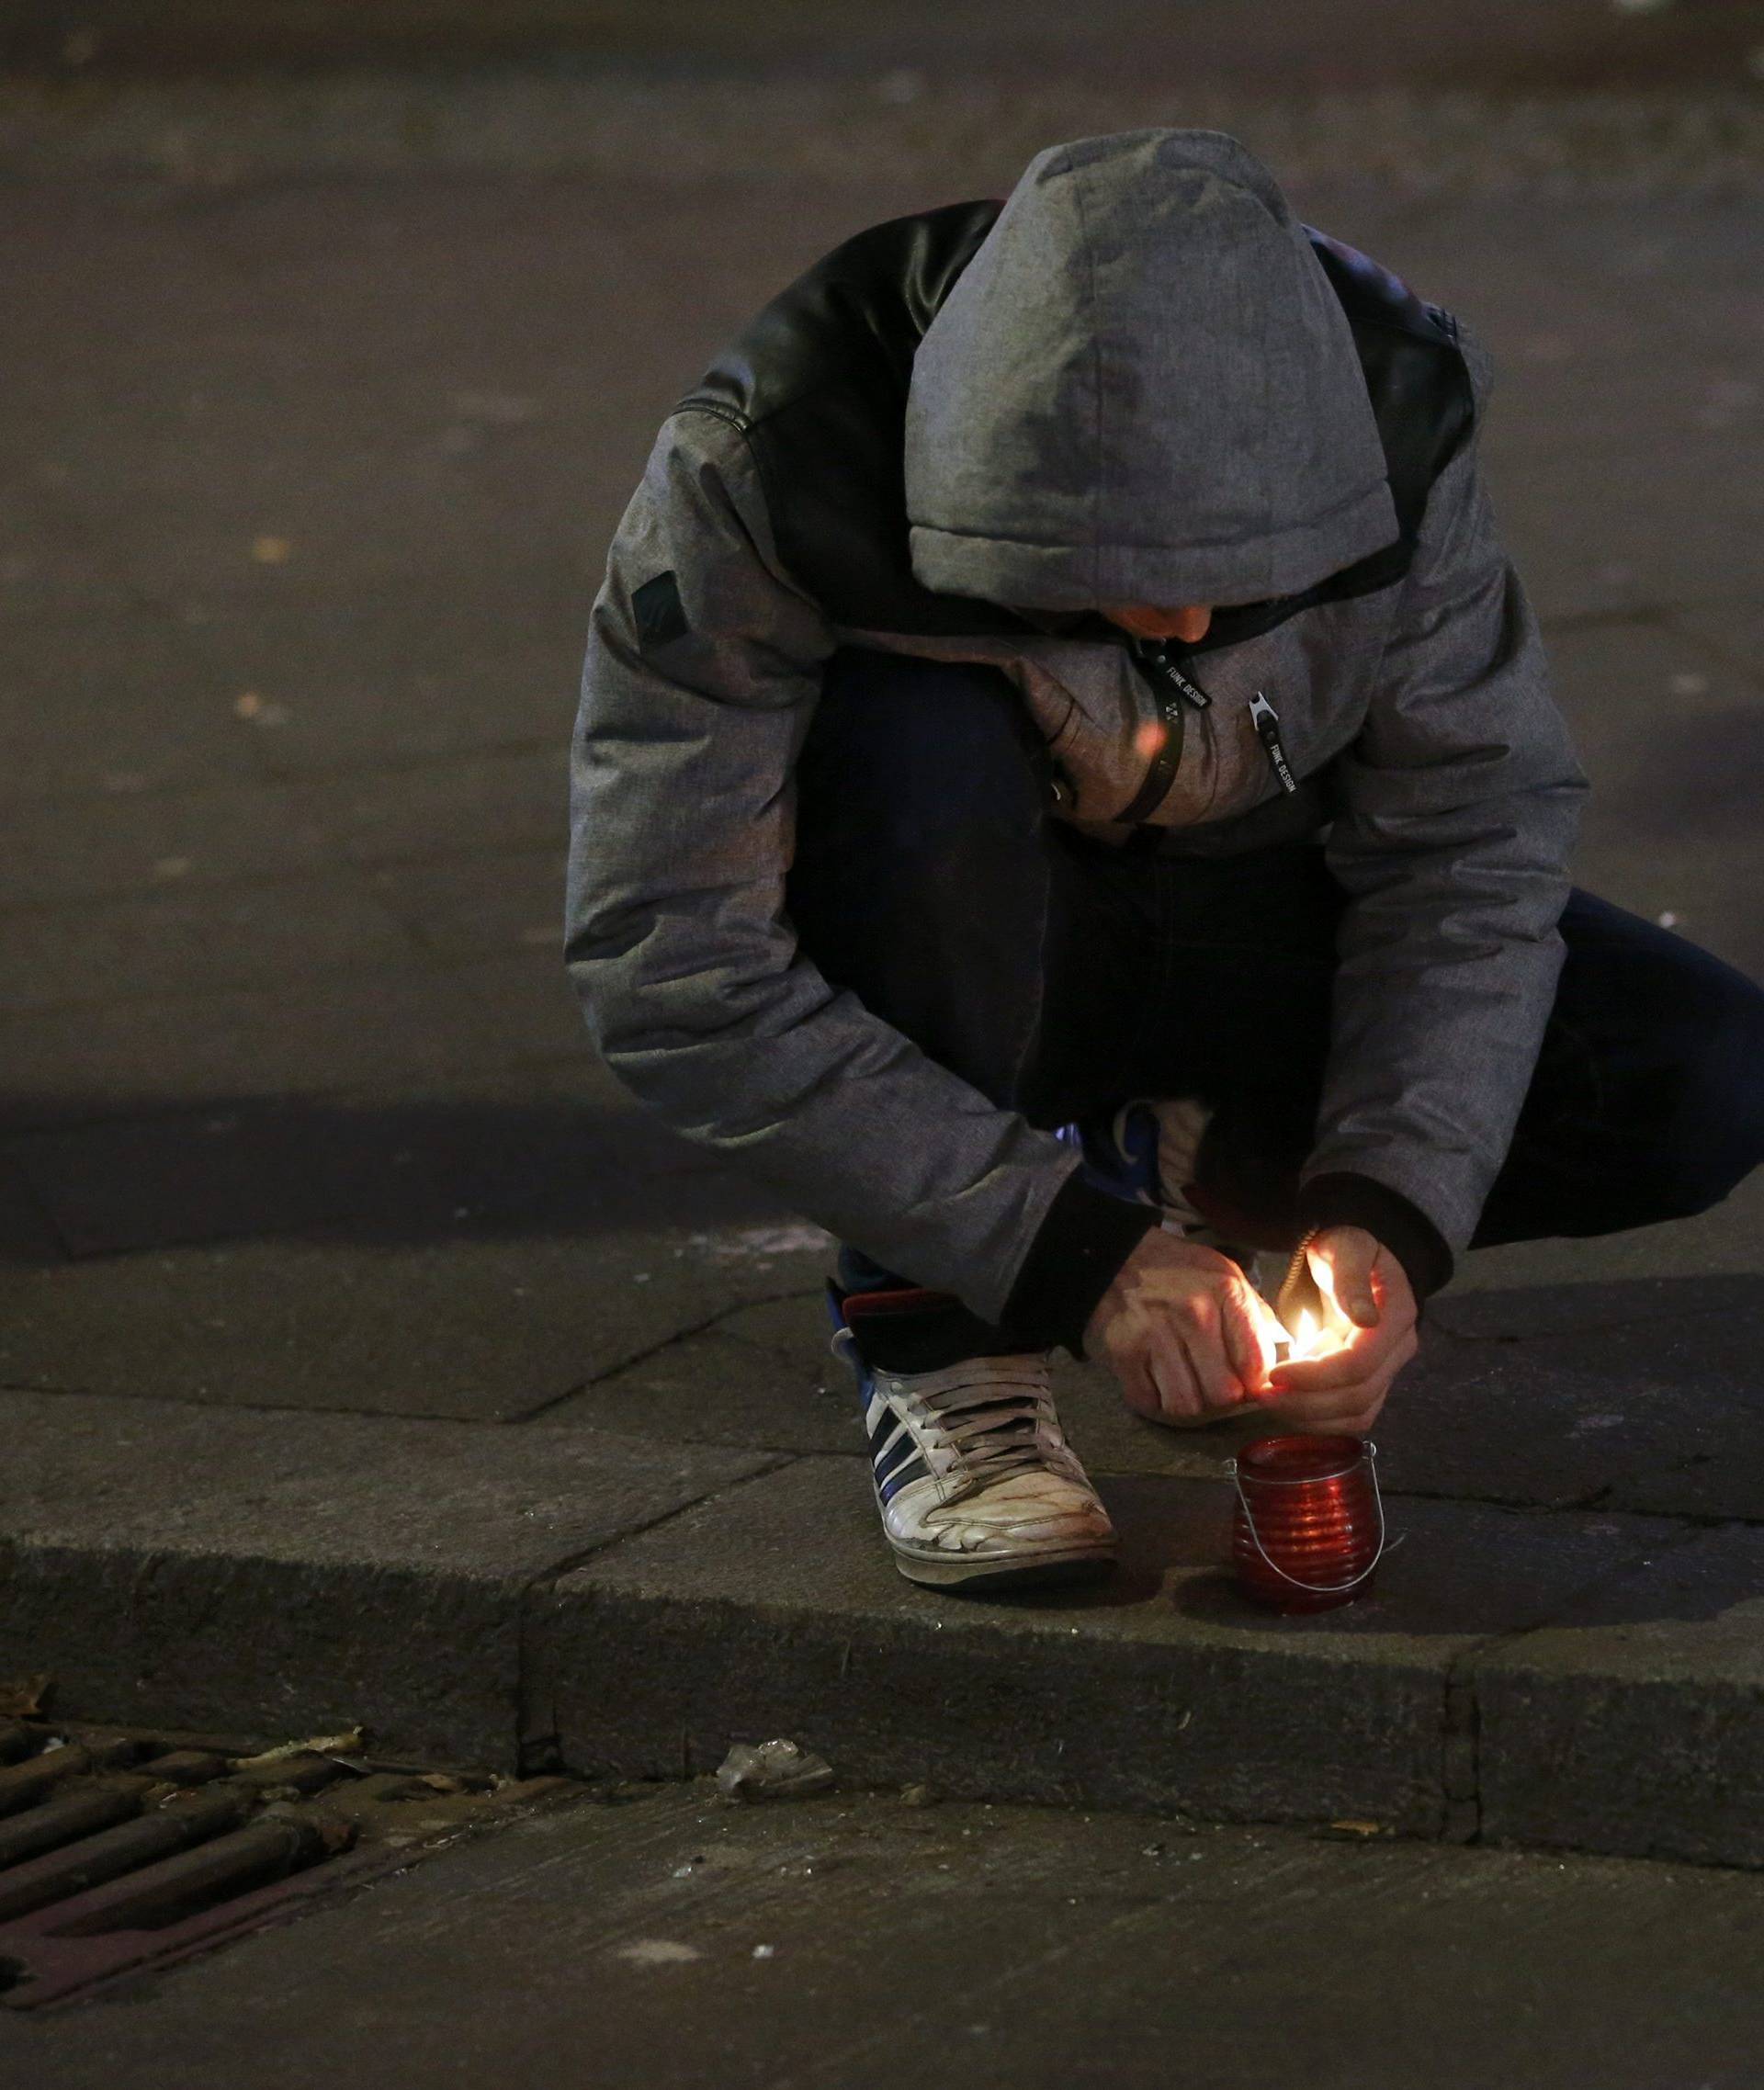 A man lights a candle near the site where a truck ploughed through a crowd at a Berlin Christmas market